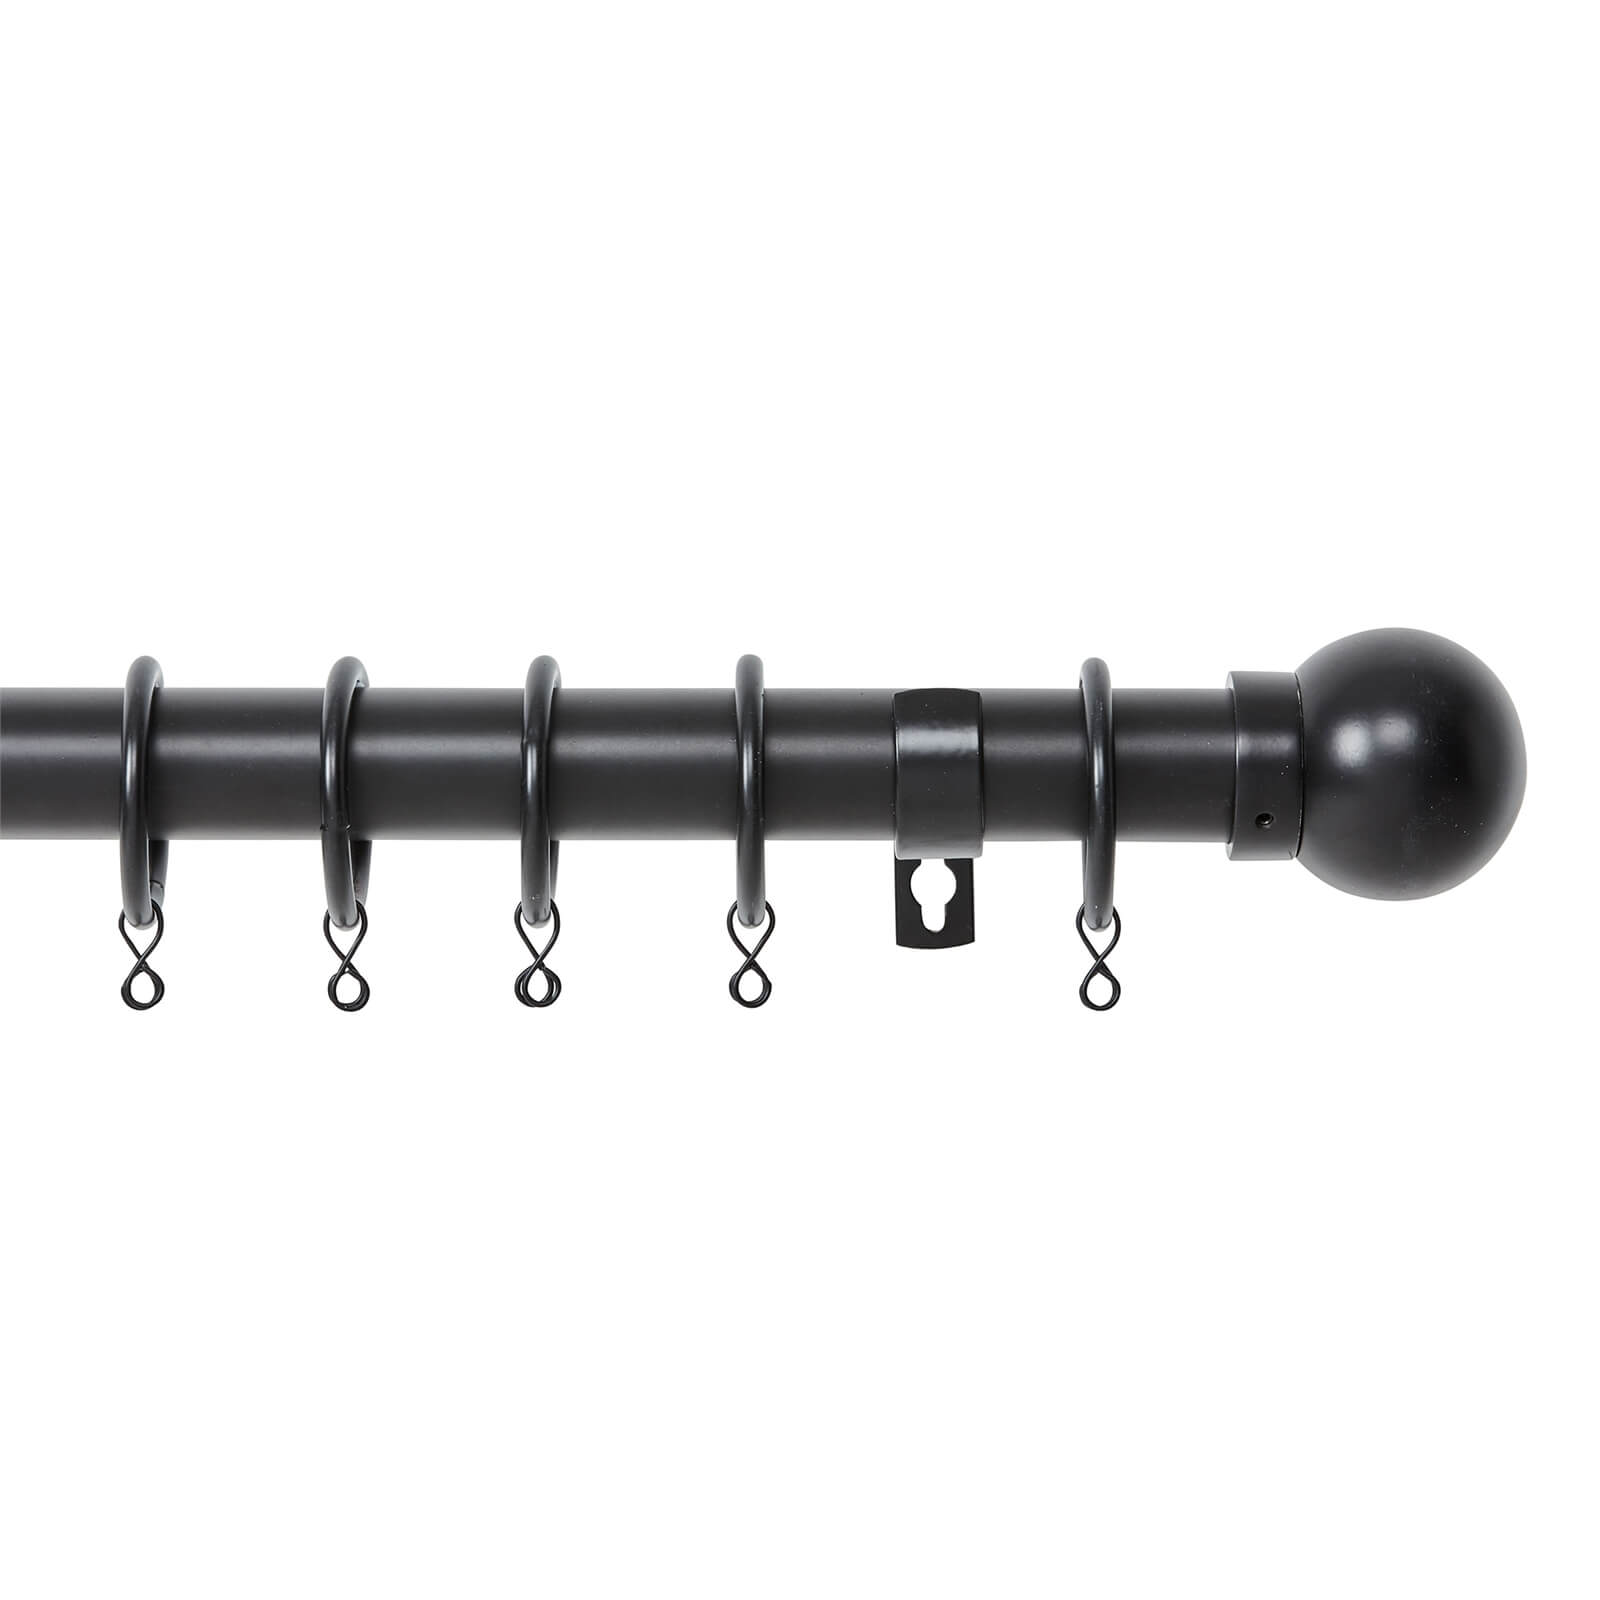 Photo of Extendable Ball Finial Curtain Pole - Black - 1.2-2.1m -25/28mm-